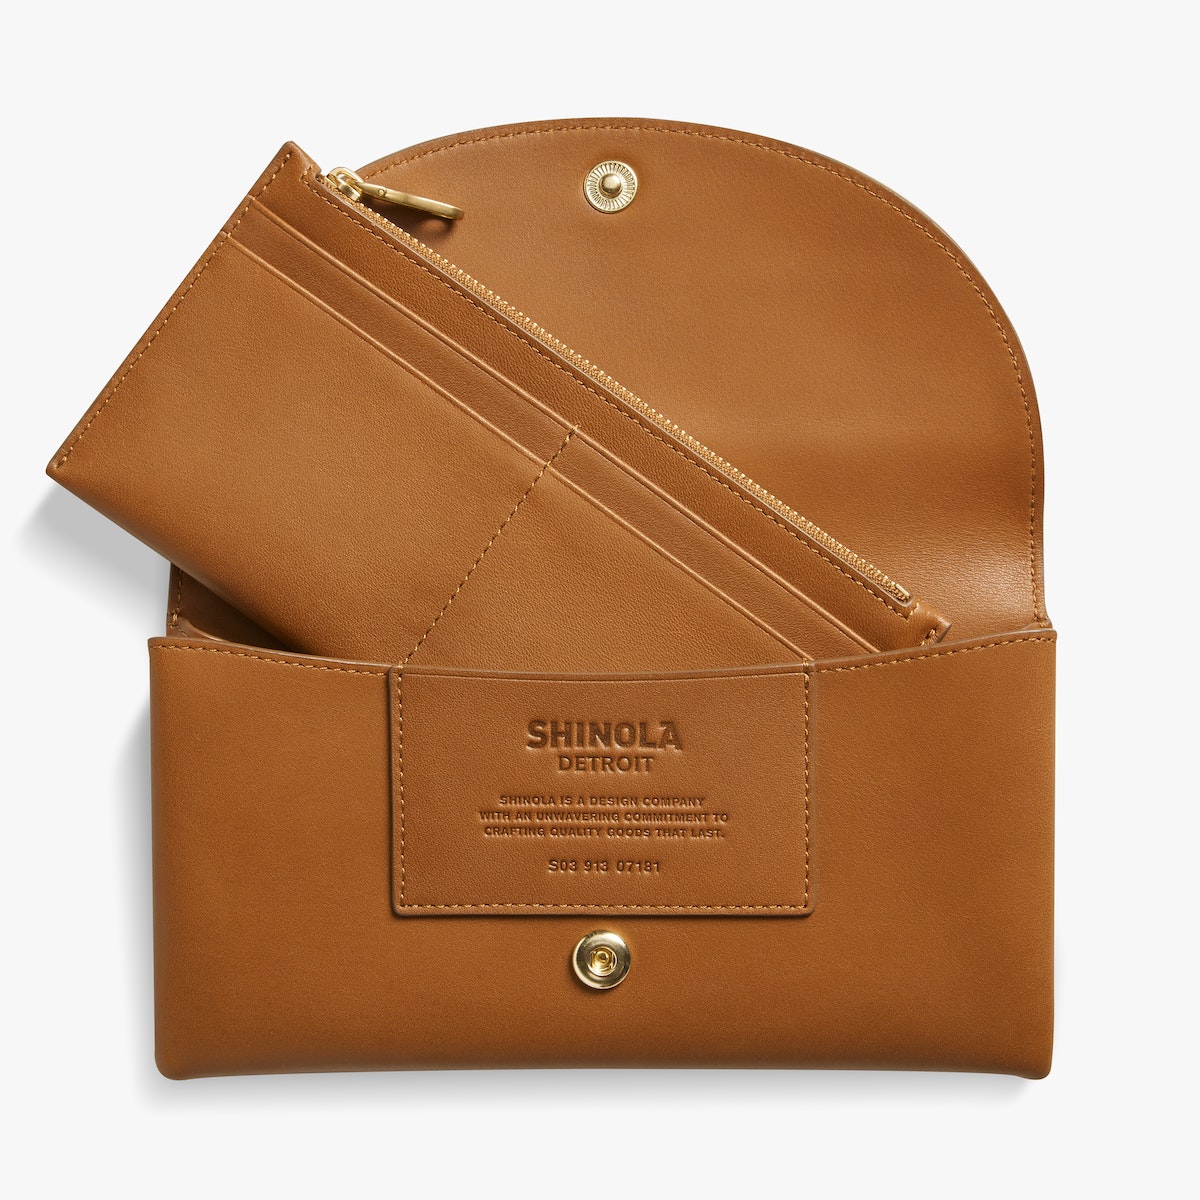 BIRDY LARGE SNAP WALLET | Natural Leather